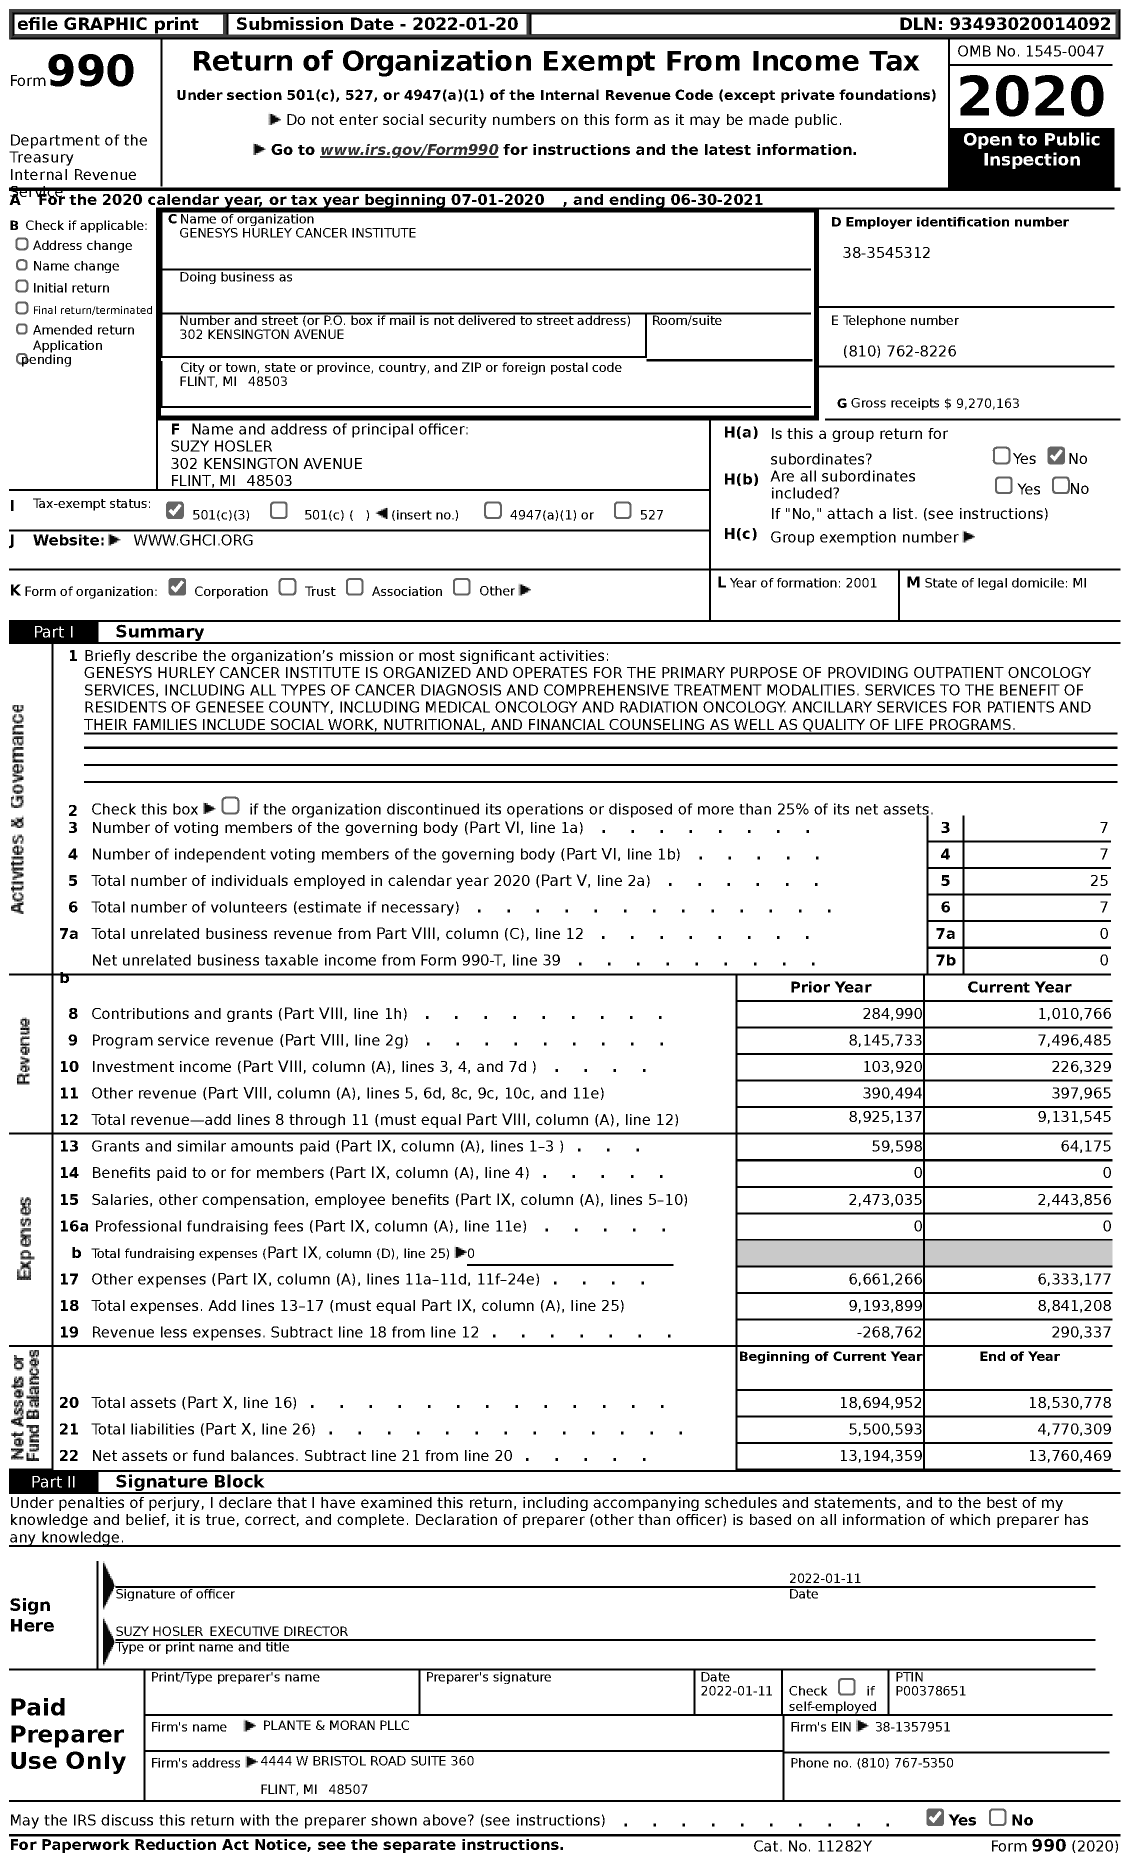 Image of first page of 2020 Form 990 for Genesys Hurley Cancer Institute (GHCI)